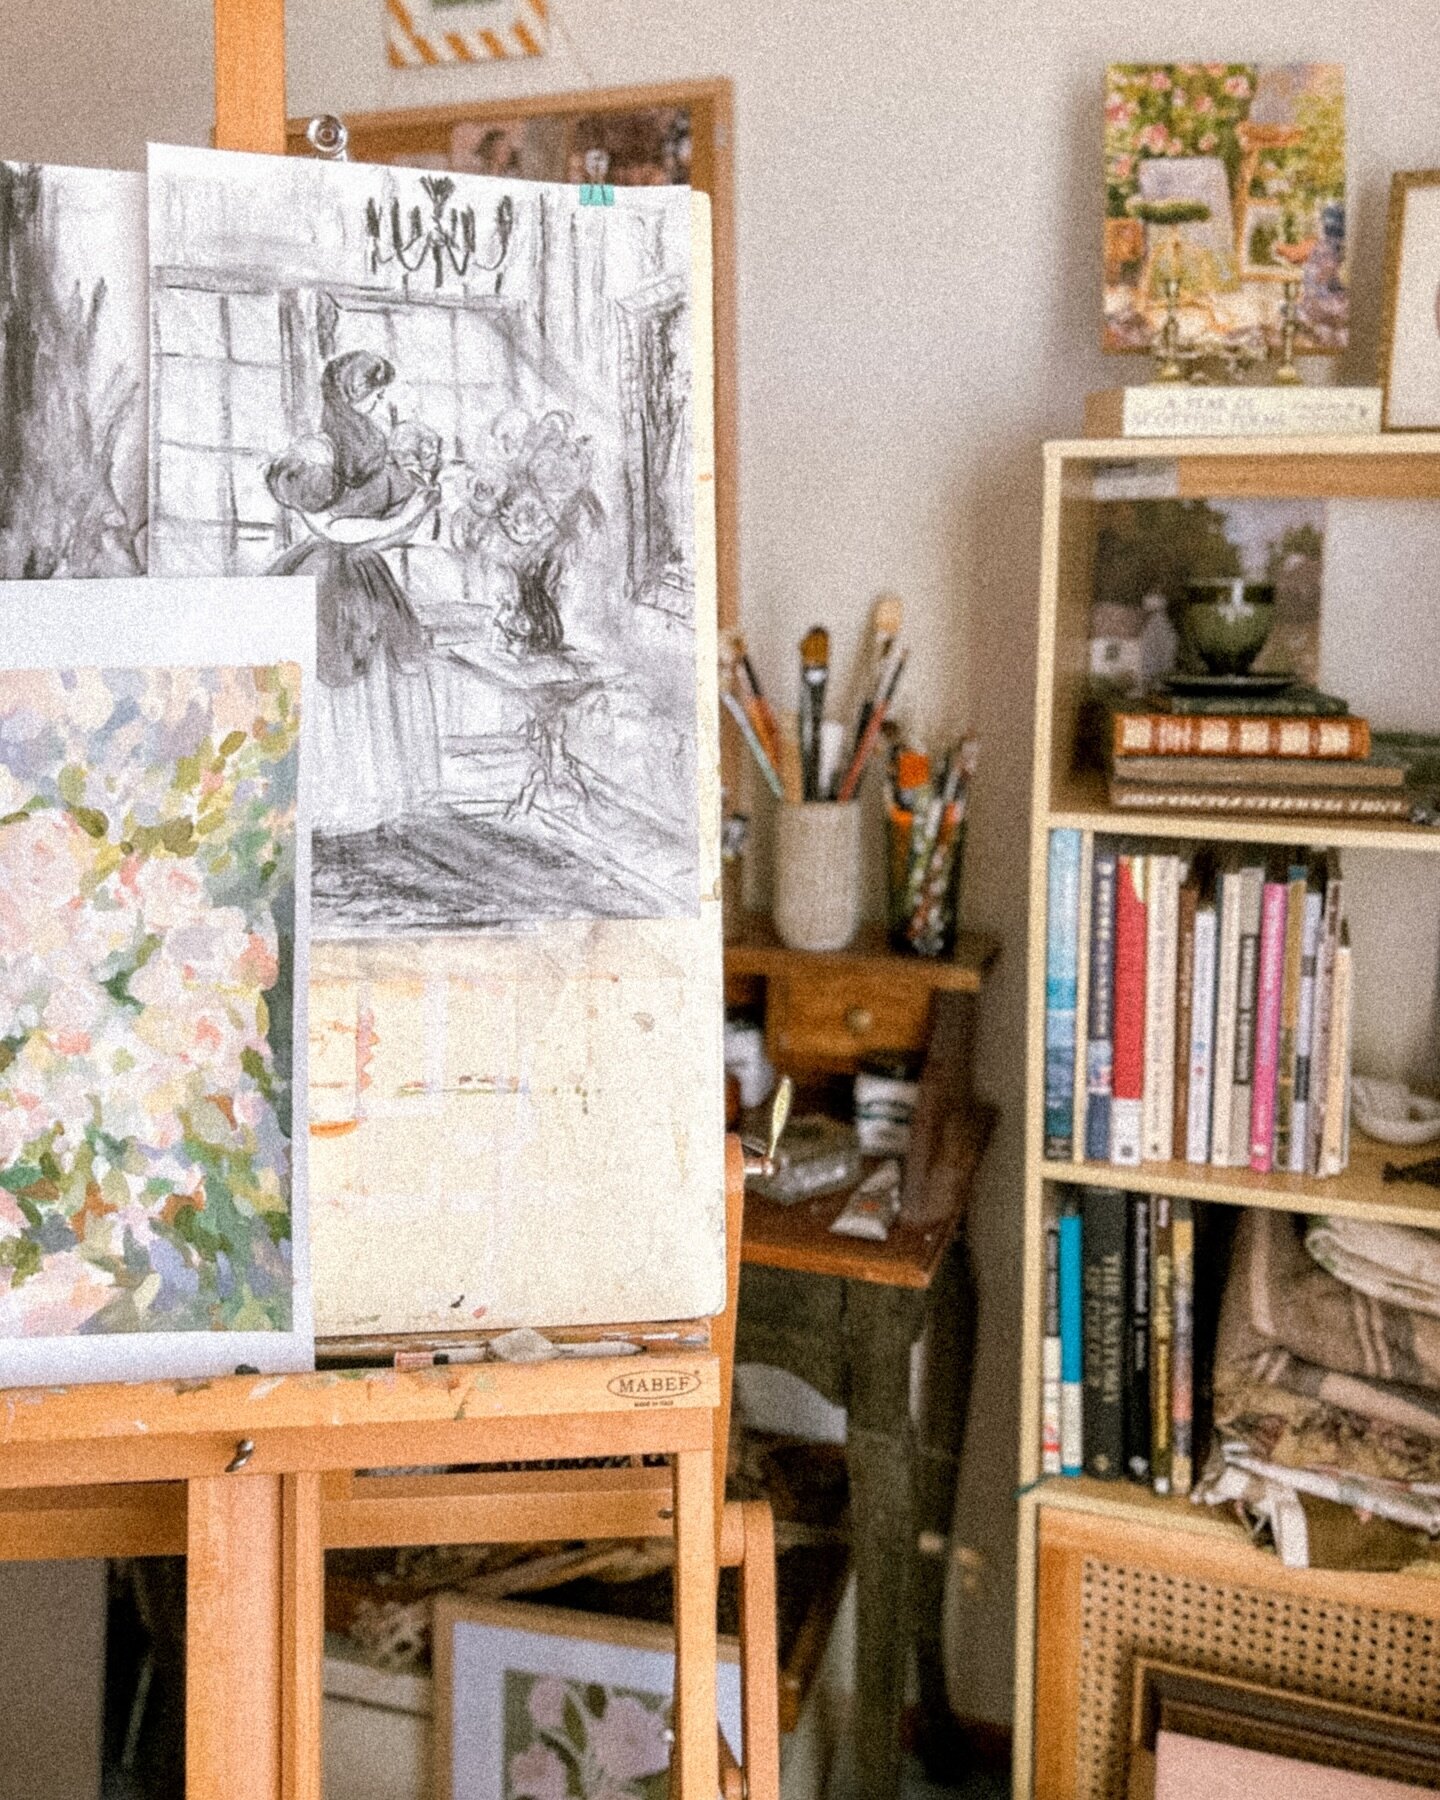 Rounding out a quiet day with this snap of my studio 🍂 I really love having a space to create where I&rsquo;m not in the way, where I can leave something half done for a day or three. 
.
#artstudio #artistspace #acrylicpainting #worksonpaper #tradit